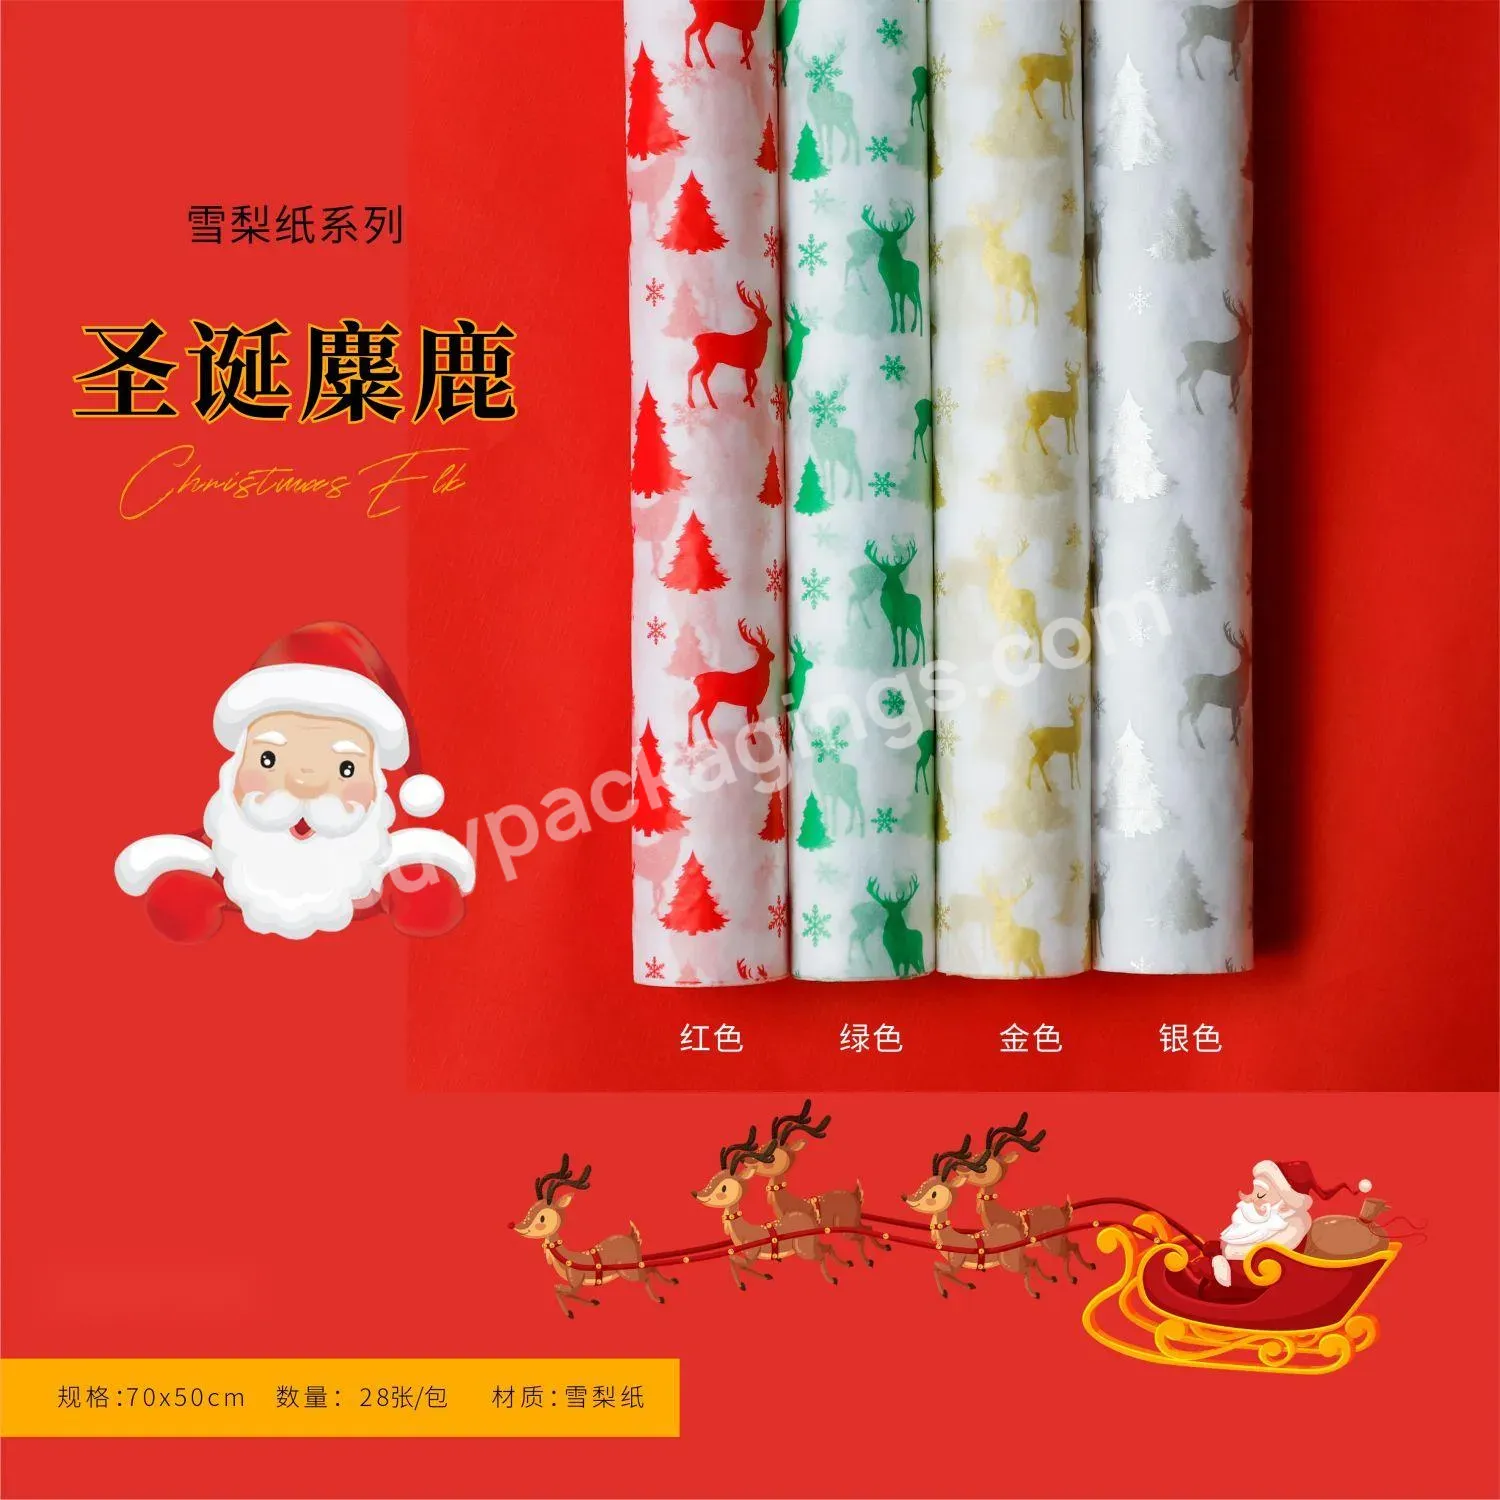 New Christmas Elk Design Printing 50*70cm 28sheet/bag Gfit Flower Wrapping Tissue Paper For Christmas Decoration - Buy New Christmas Elk Design Printing Tissue Paper,50*70cm 28sheet/bag Gfit Flower Wrapping Tissue Paper,Tissue Paper For Christmas Dec